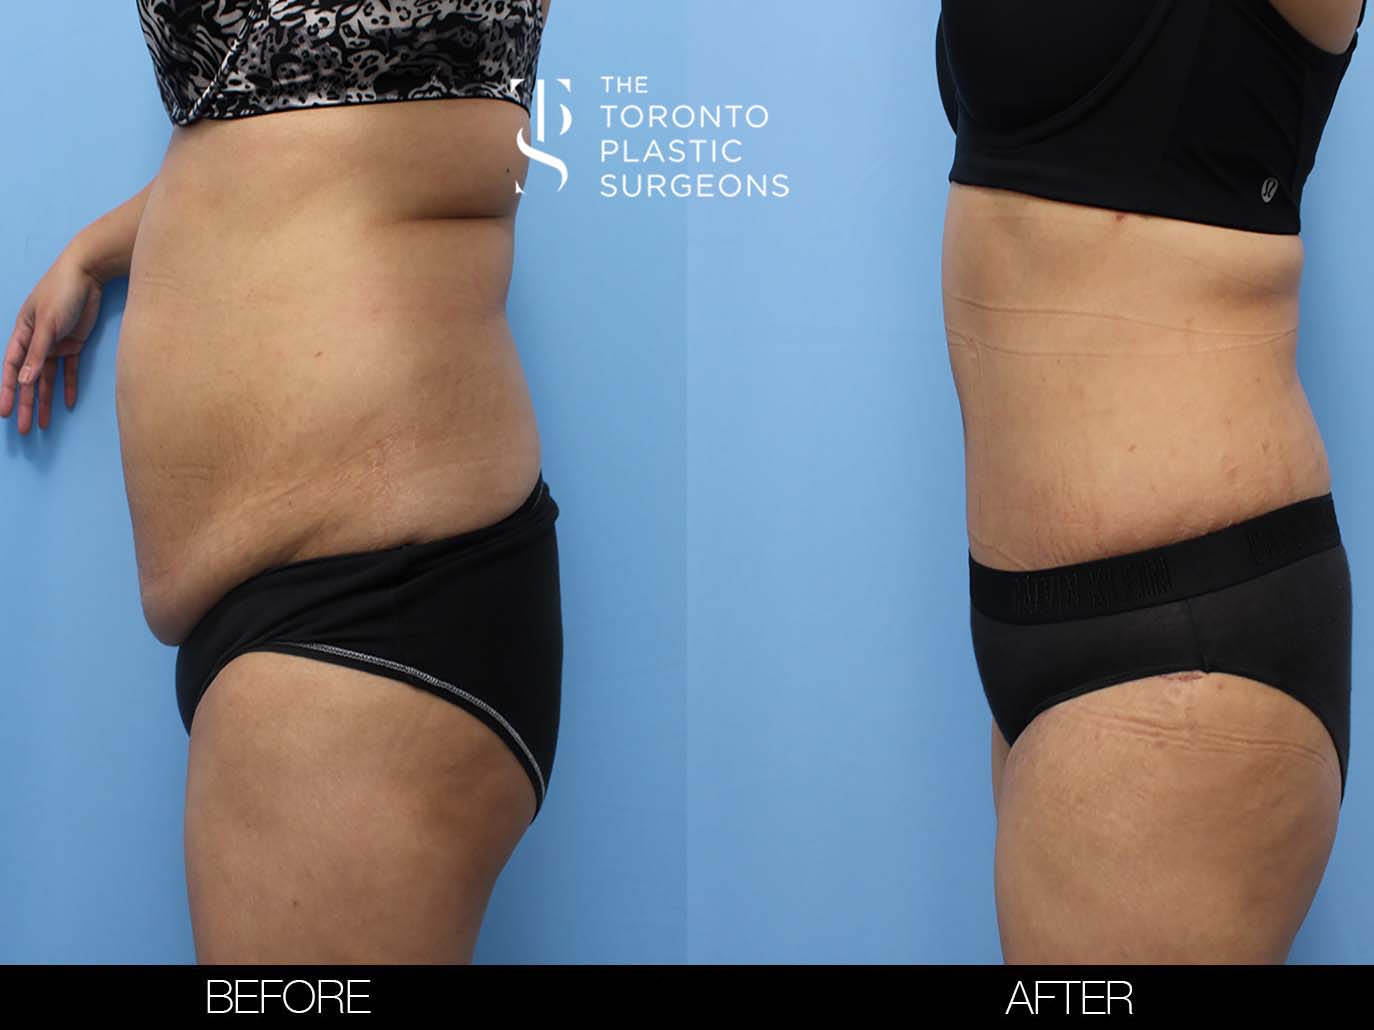 CAN I HAVE A TUMMY TUCK WITHOUT MUSCLE TIGHTENING?